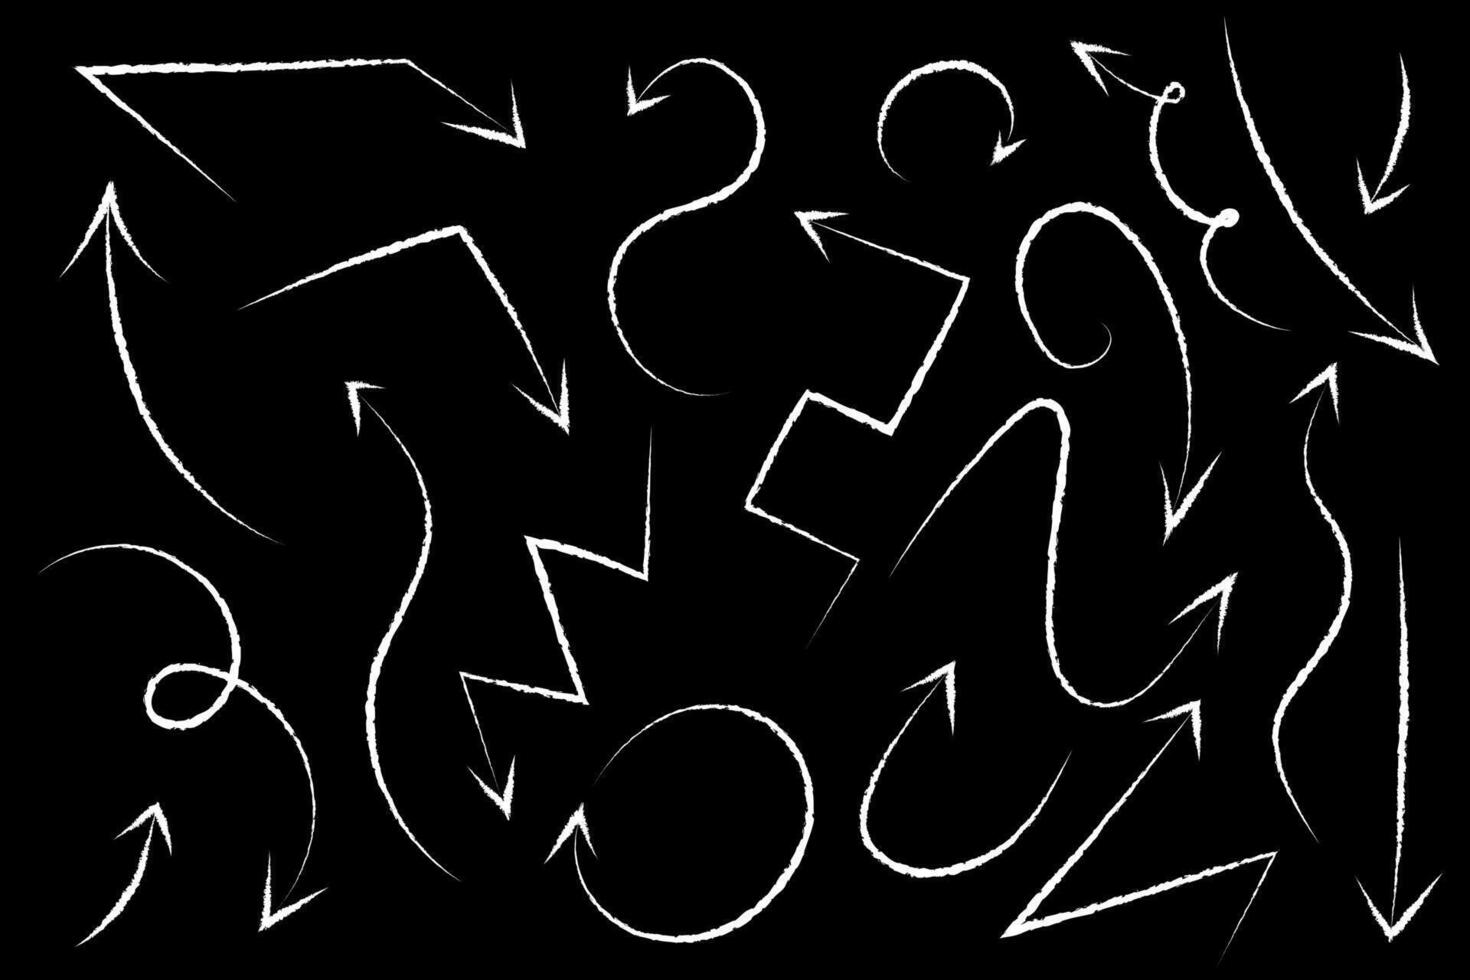 Set of Arrows drawn with Chalk on blackboard. Different types of signs on dark background - Zigzag, Wave, turn. Collection of direction symbols. Outline Sketch. Black-white image. illustration vector